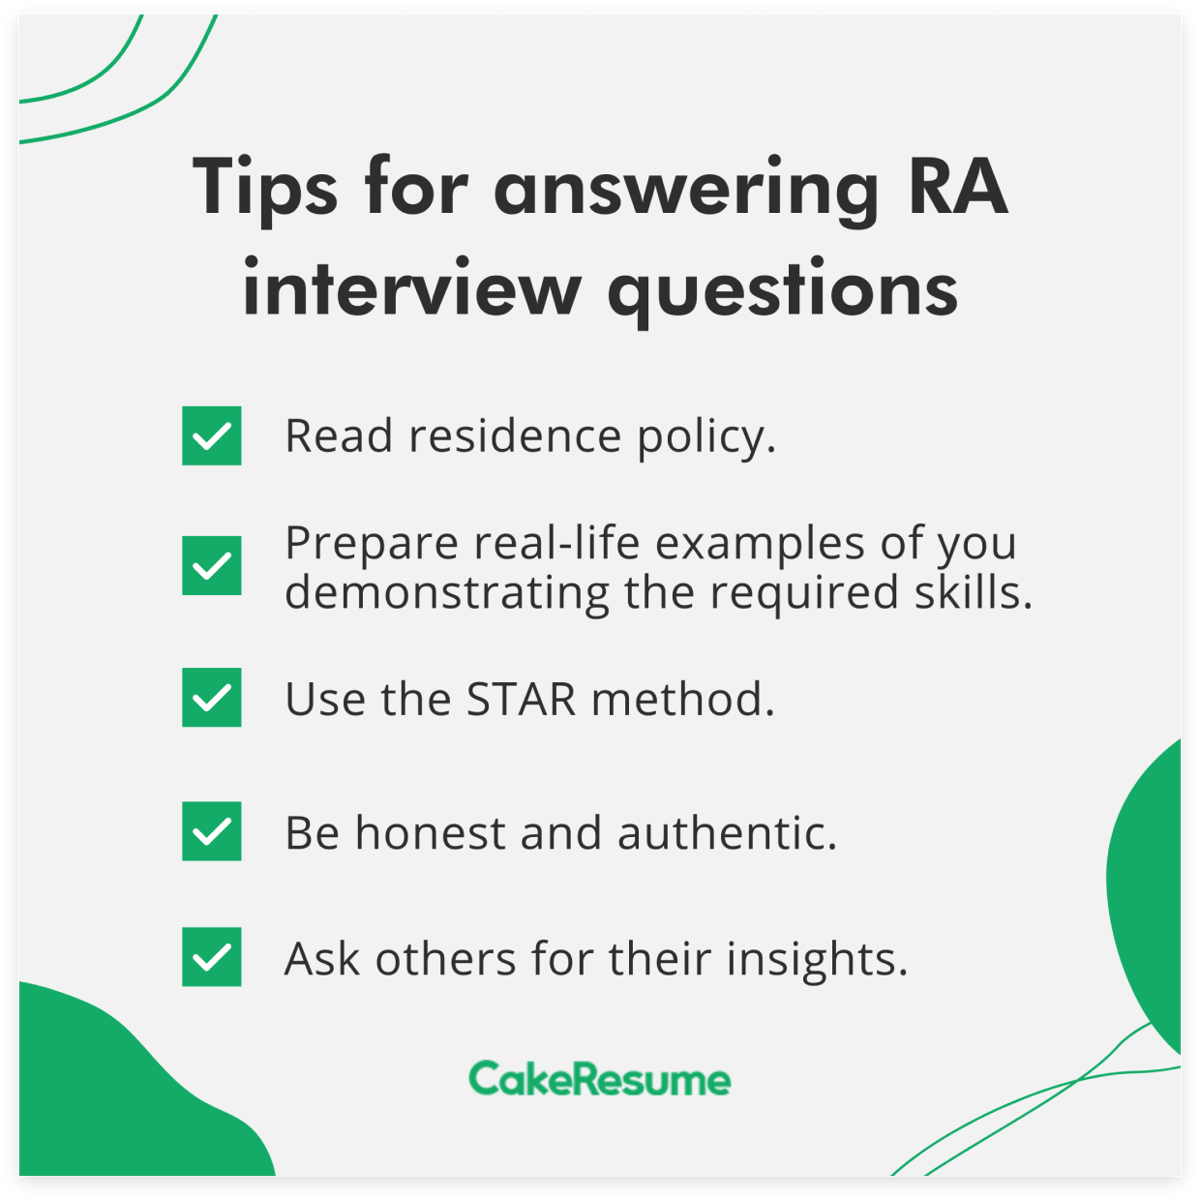 RA interview tips